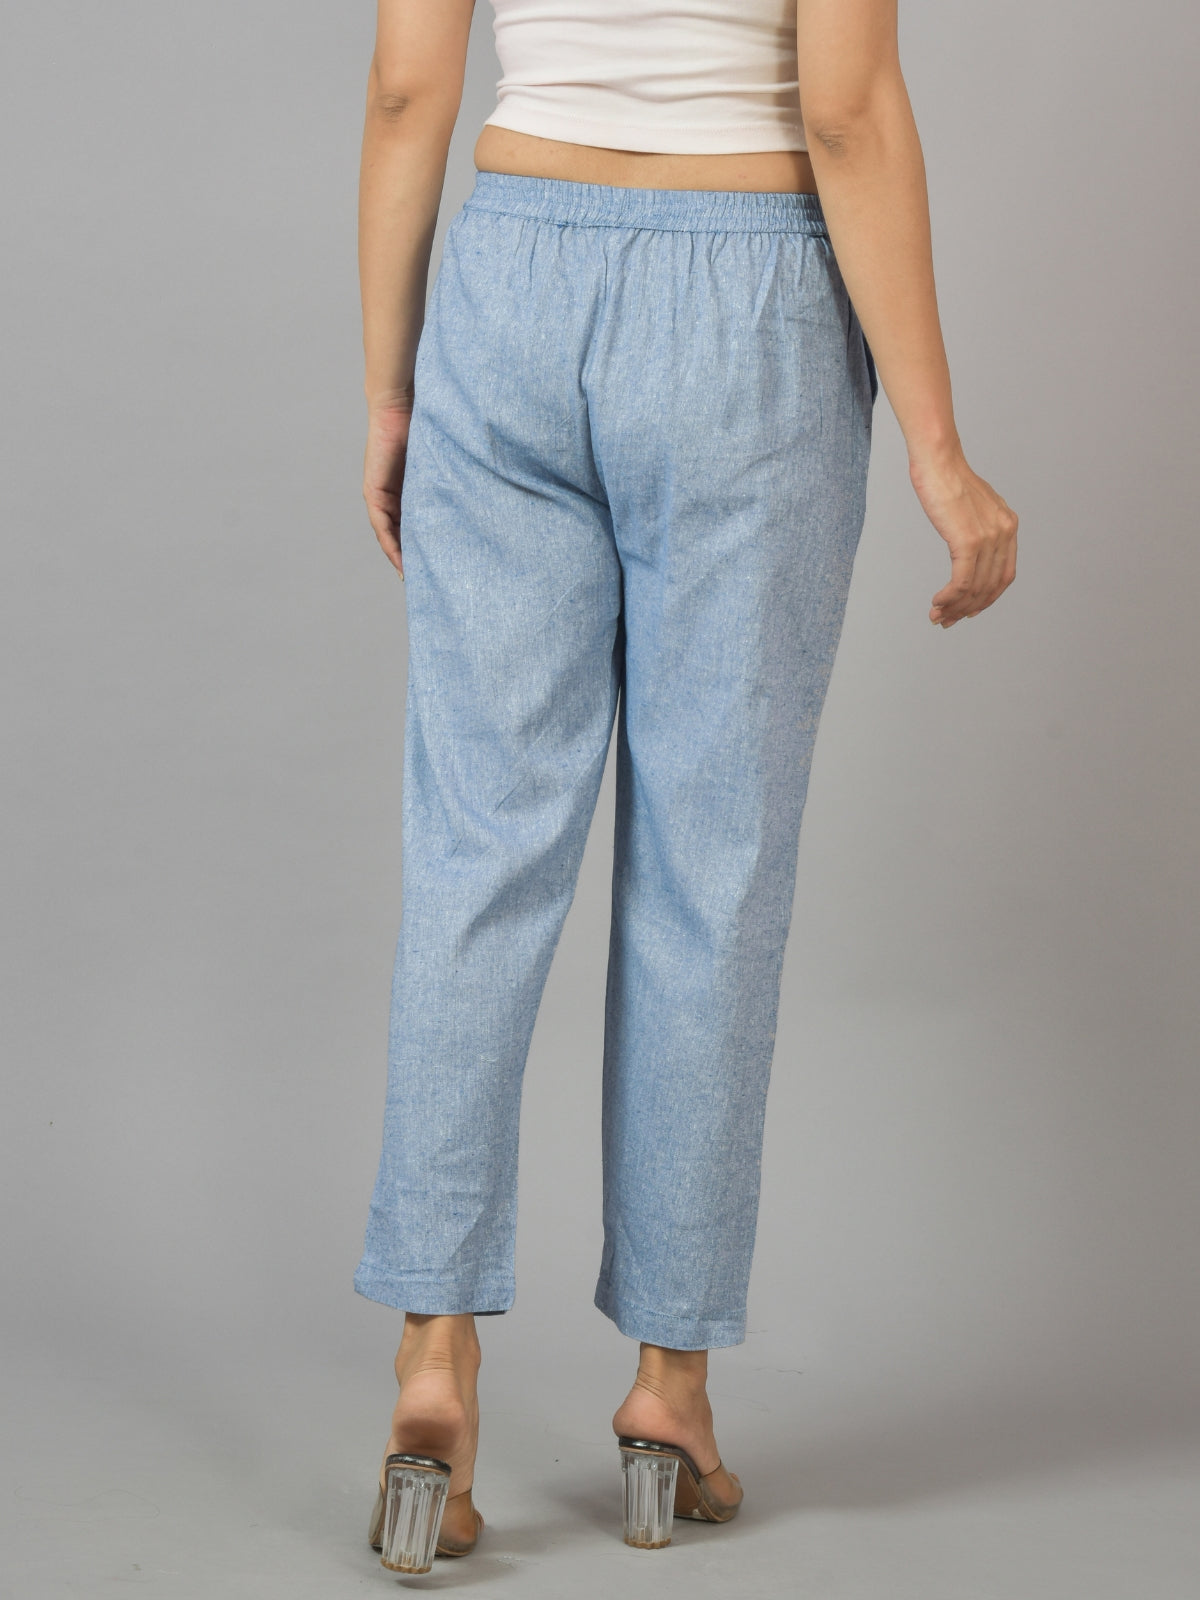 Pack Of 2 Womens Denim Blue and Off White Fully Elastic Cotton Trousers